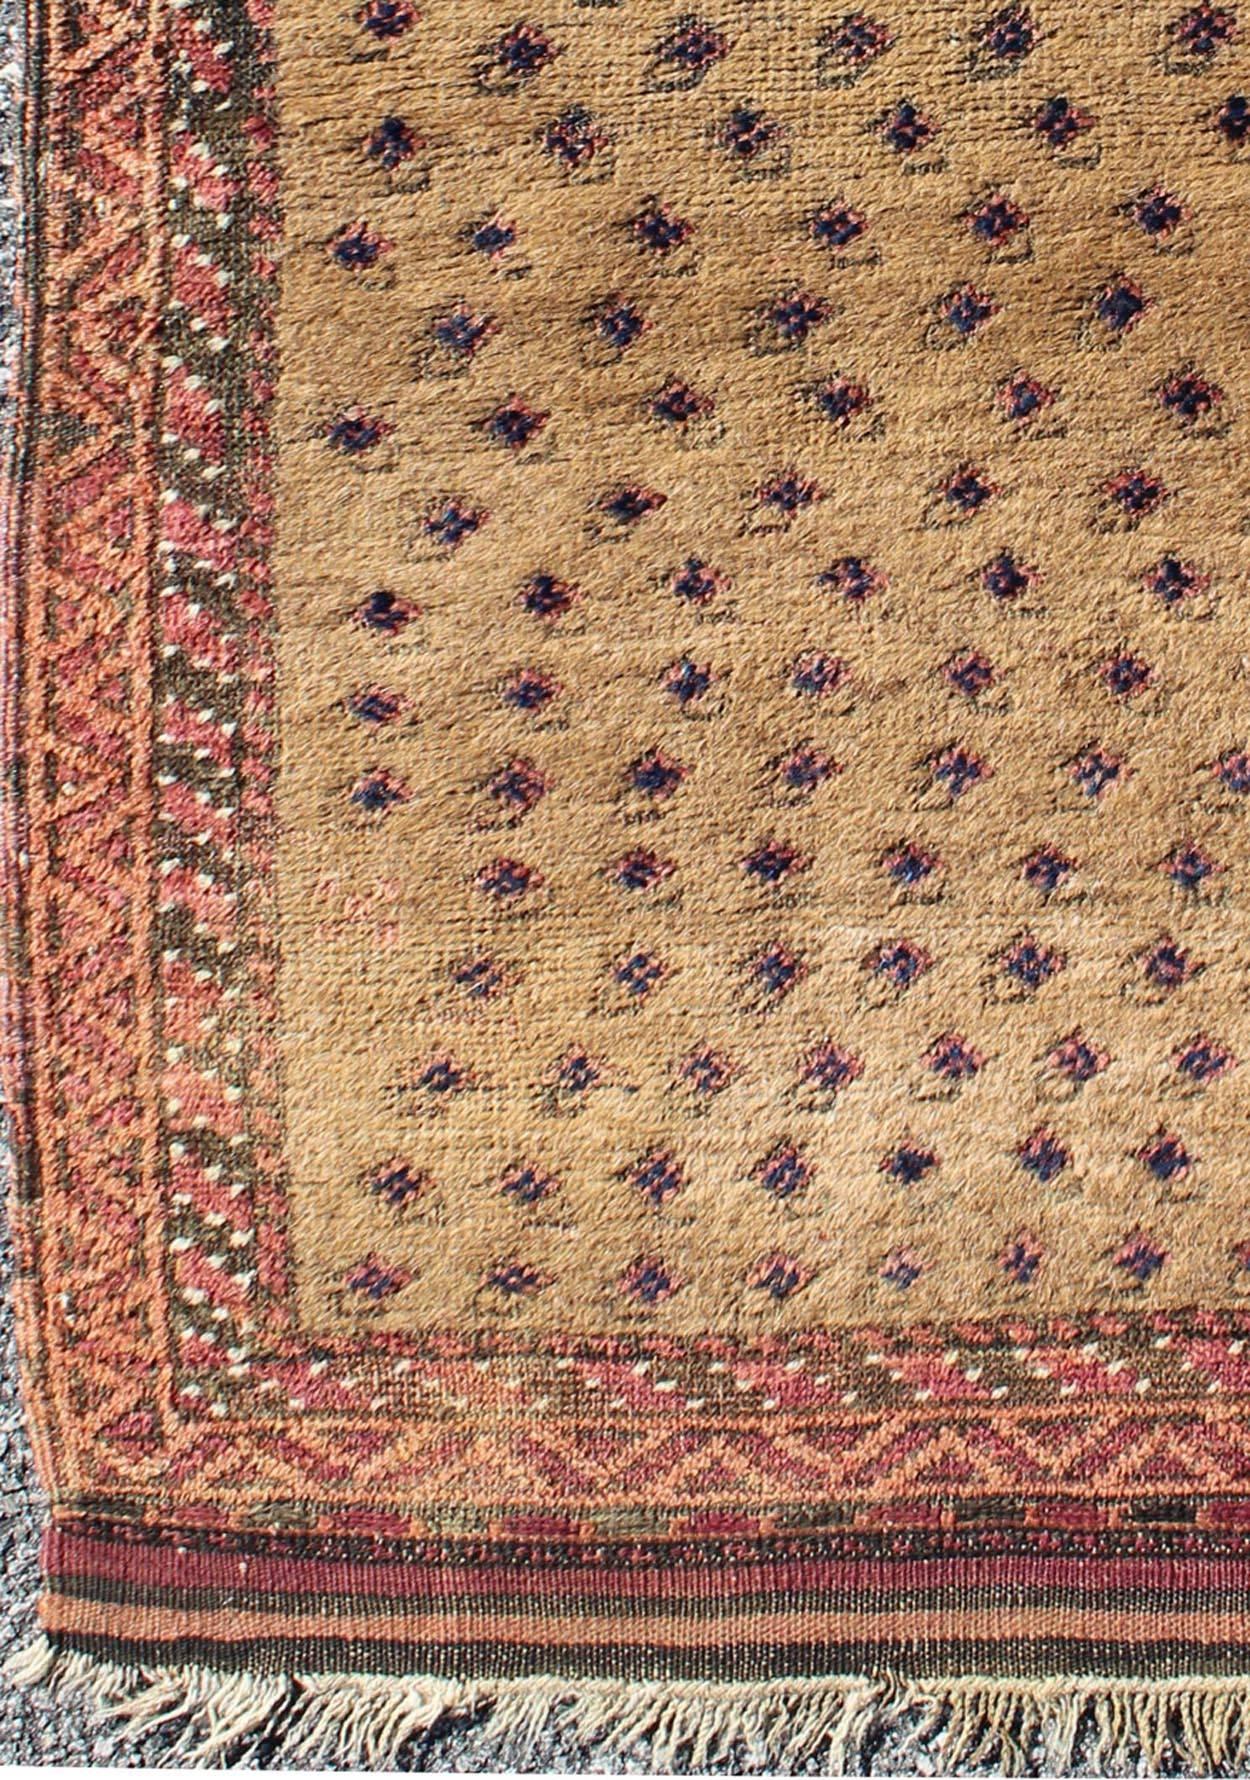 Tribal Afghan Antique Beluch Prayer Rug with All-Over Paisley Pattern in Camel, rug j10-0403, country of origin / type: Afghanistan / Tribal, circa 1900

This impressive and complex antique Afghan Beluch prayer rug (circa 1900) features an all-over